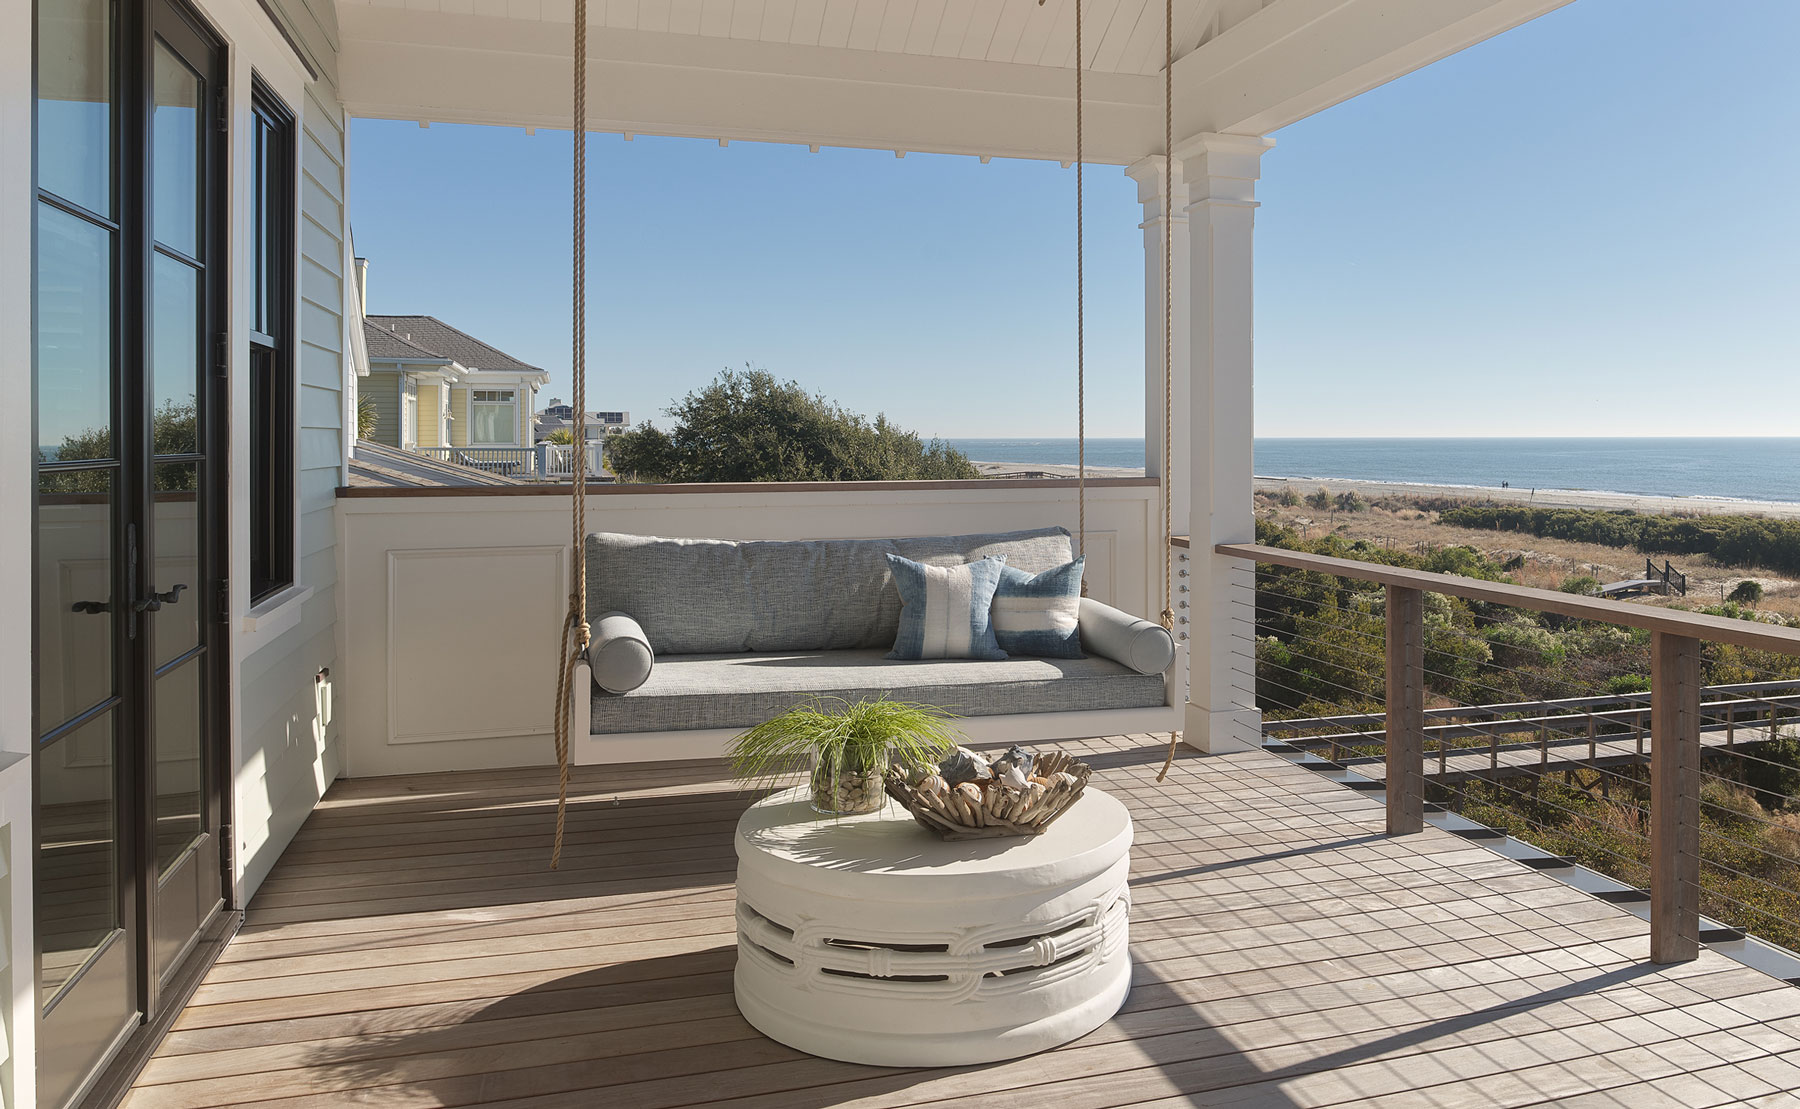 Covered porch with swinging day bed with ocean views